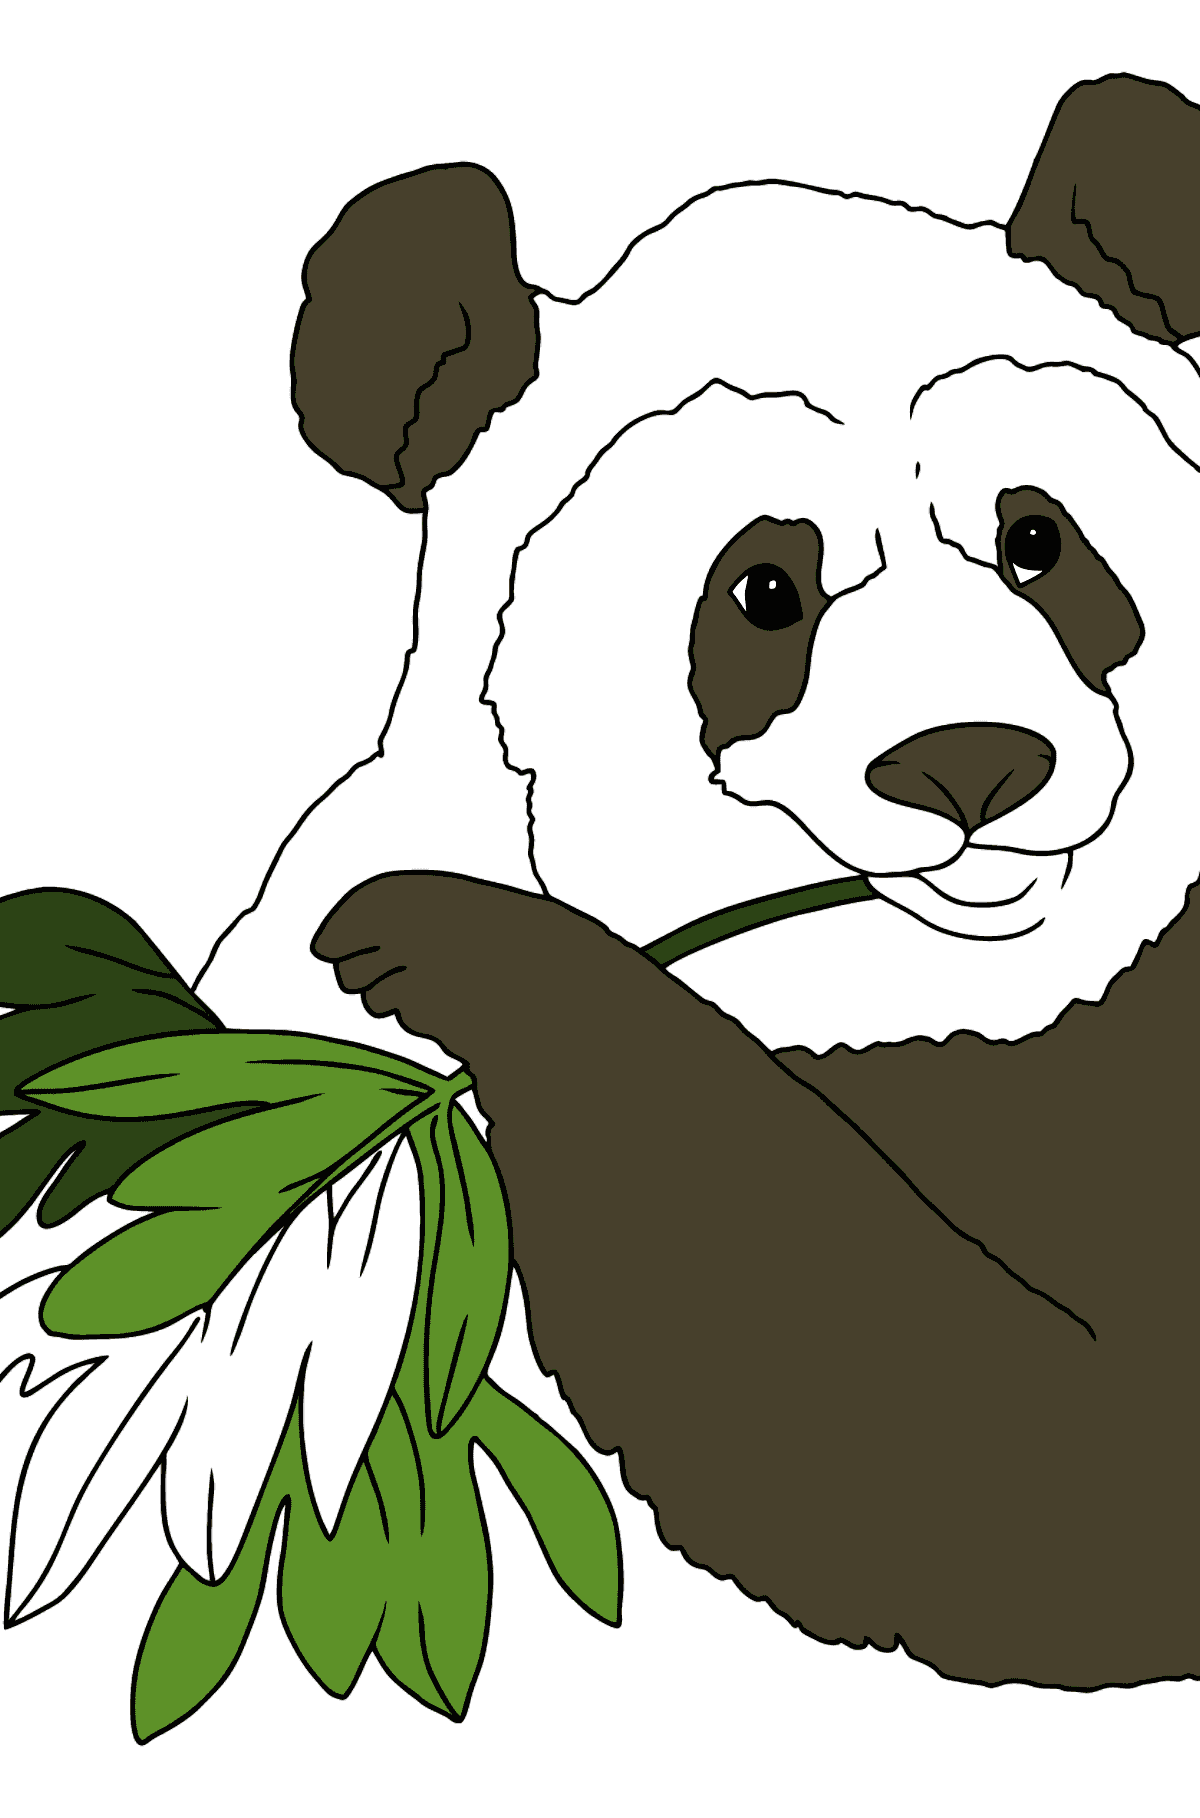 Coloring Page  - A Panda is Eating Leaves - Coloring Pages for Kids